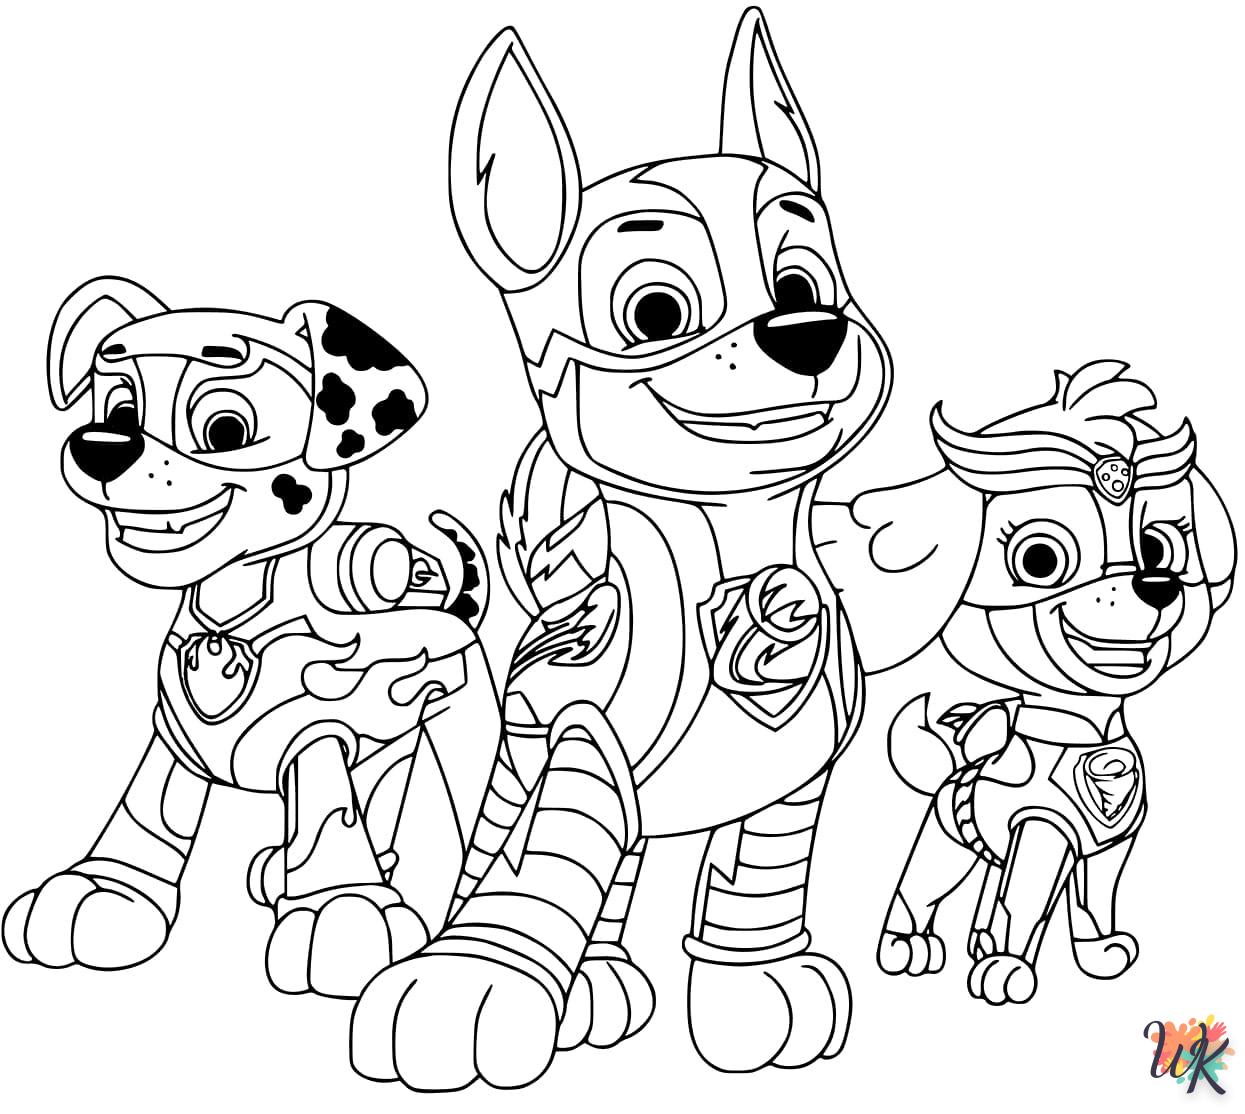 Paw Patrol coloring page to print for 4 year olds